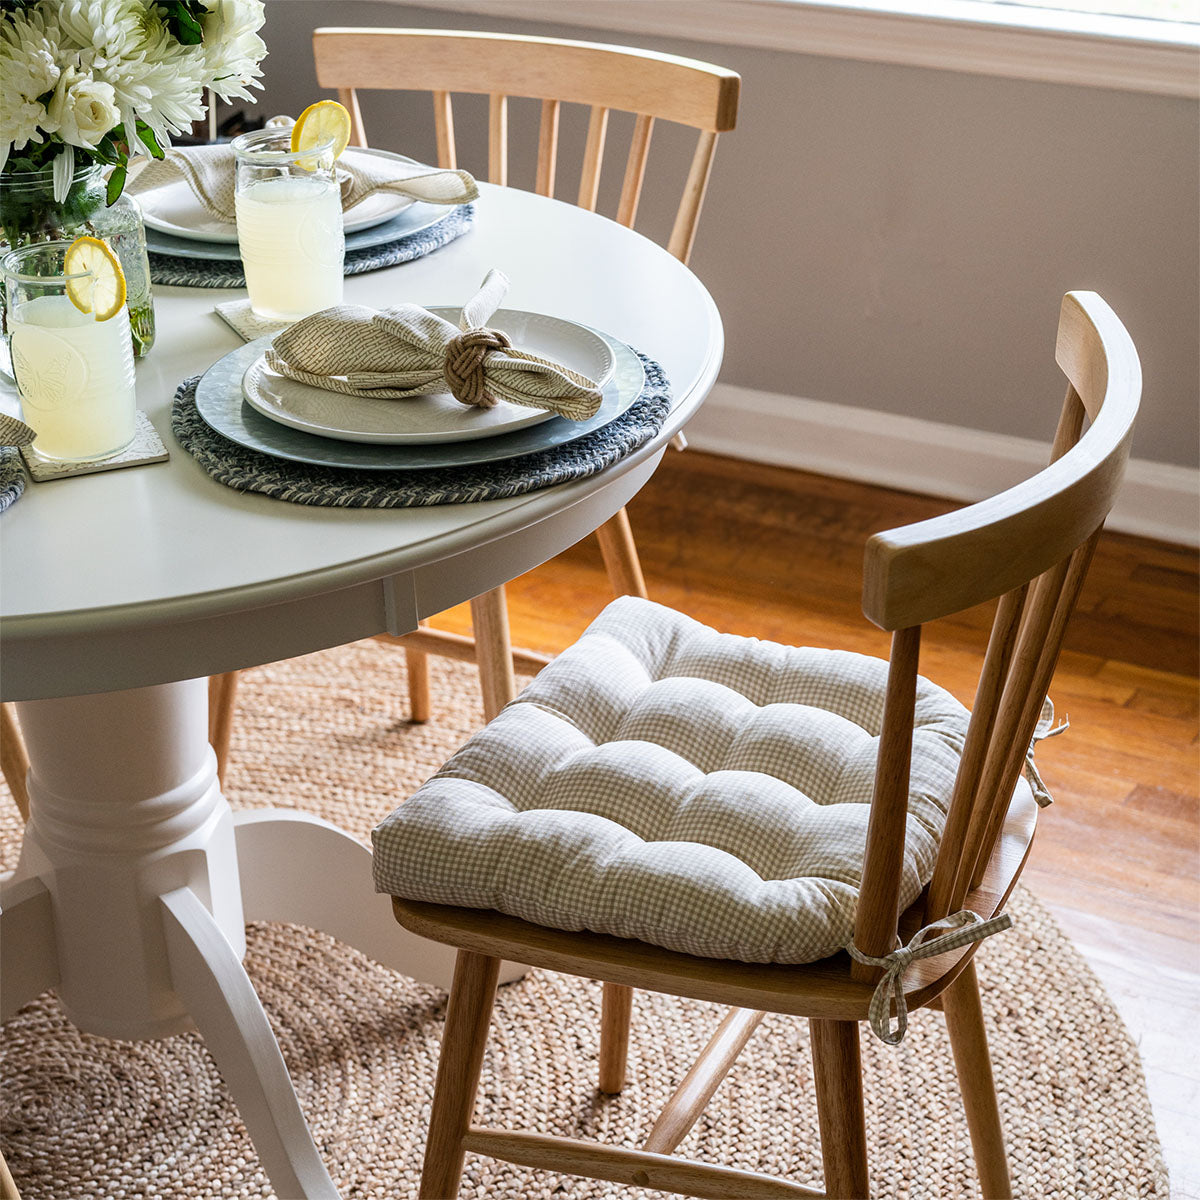 madrid gingham dining room chair cushions in natural on windsor chairs at farmhouse dining table